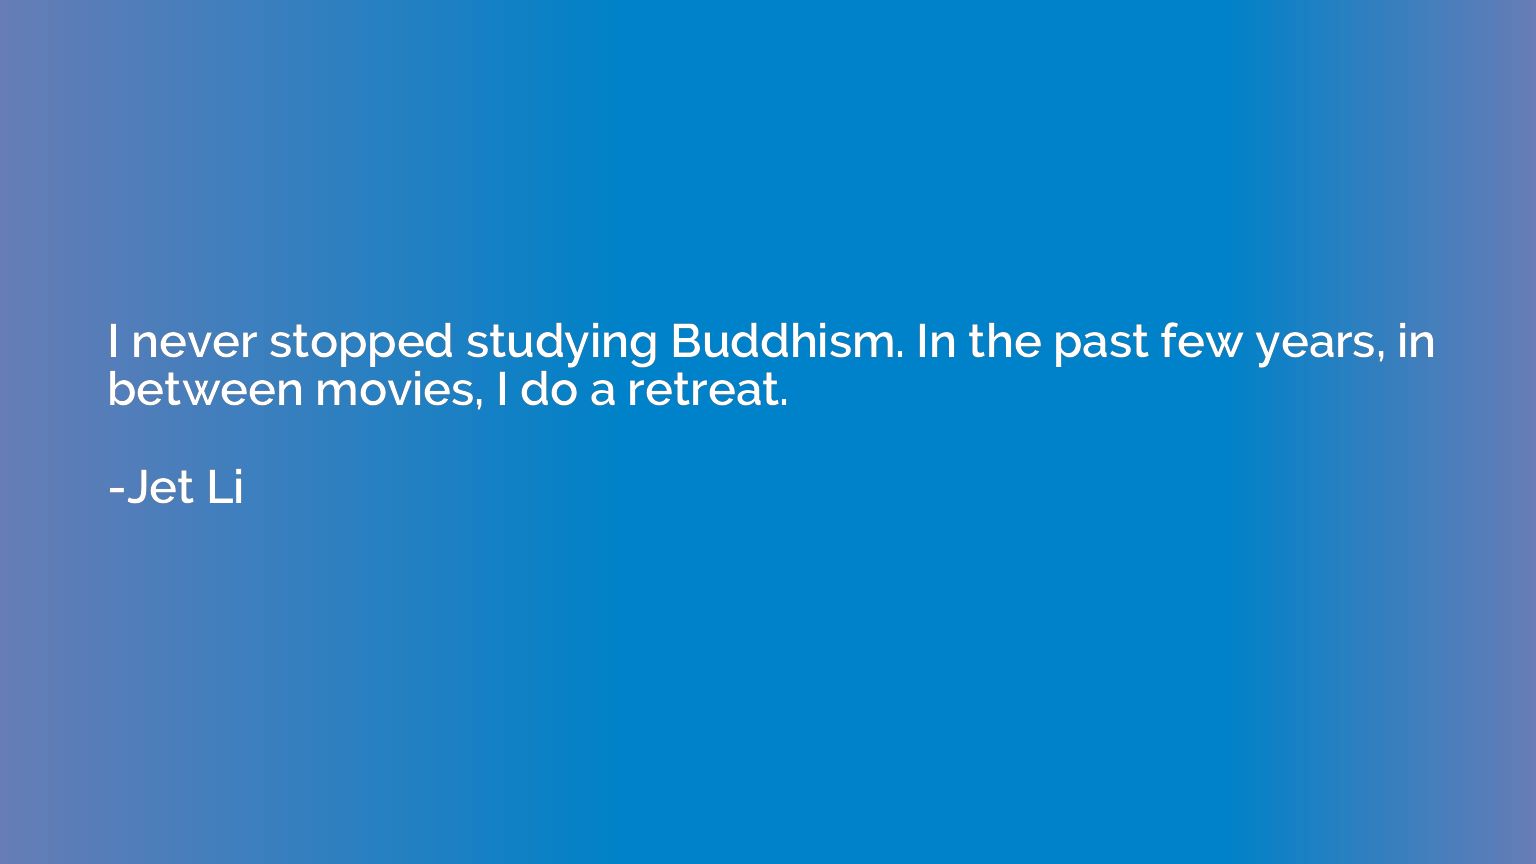 I never stopped studying Buddhism. In the past few years, in